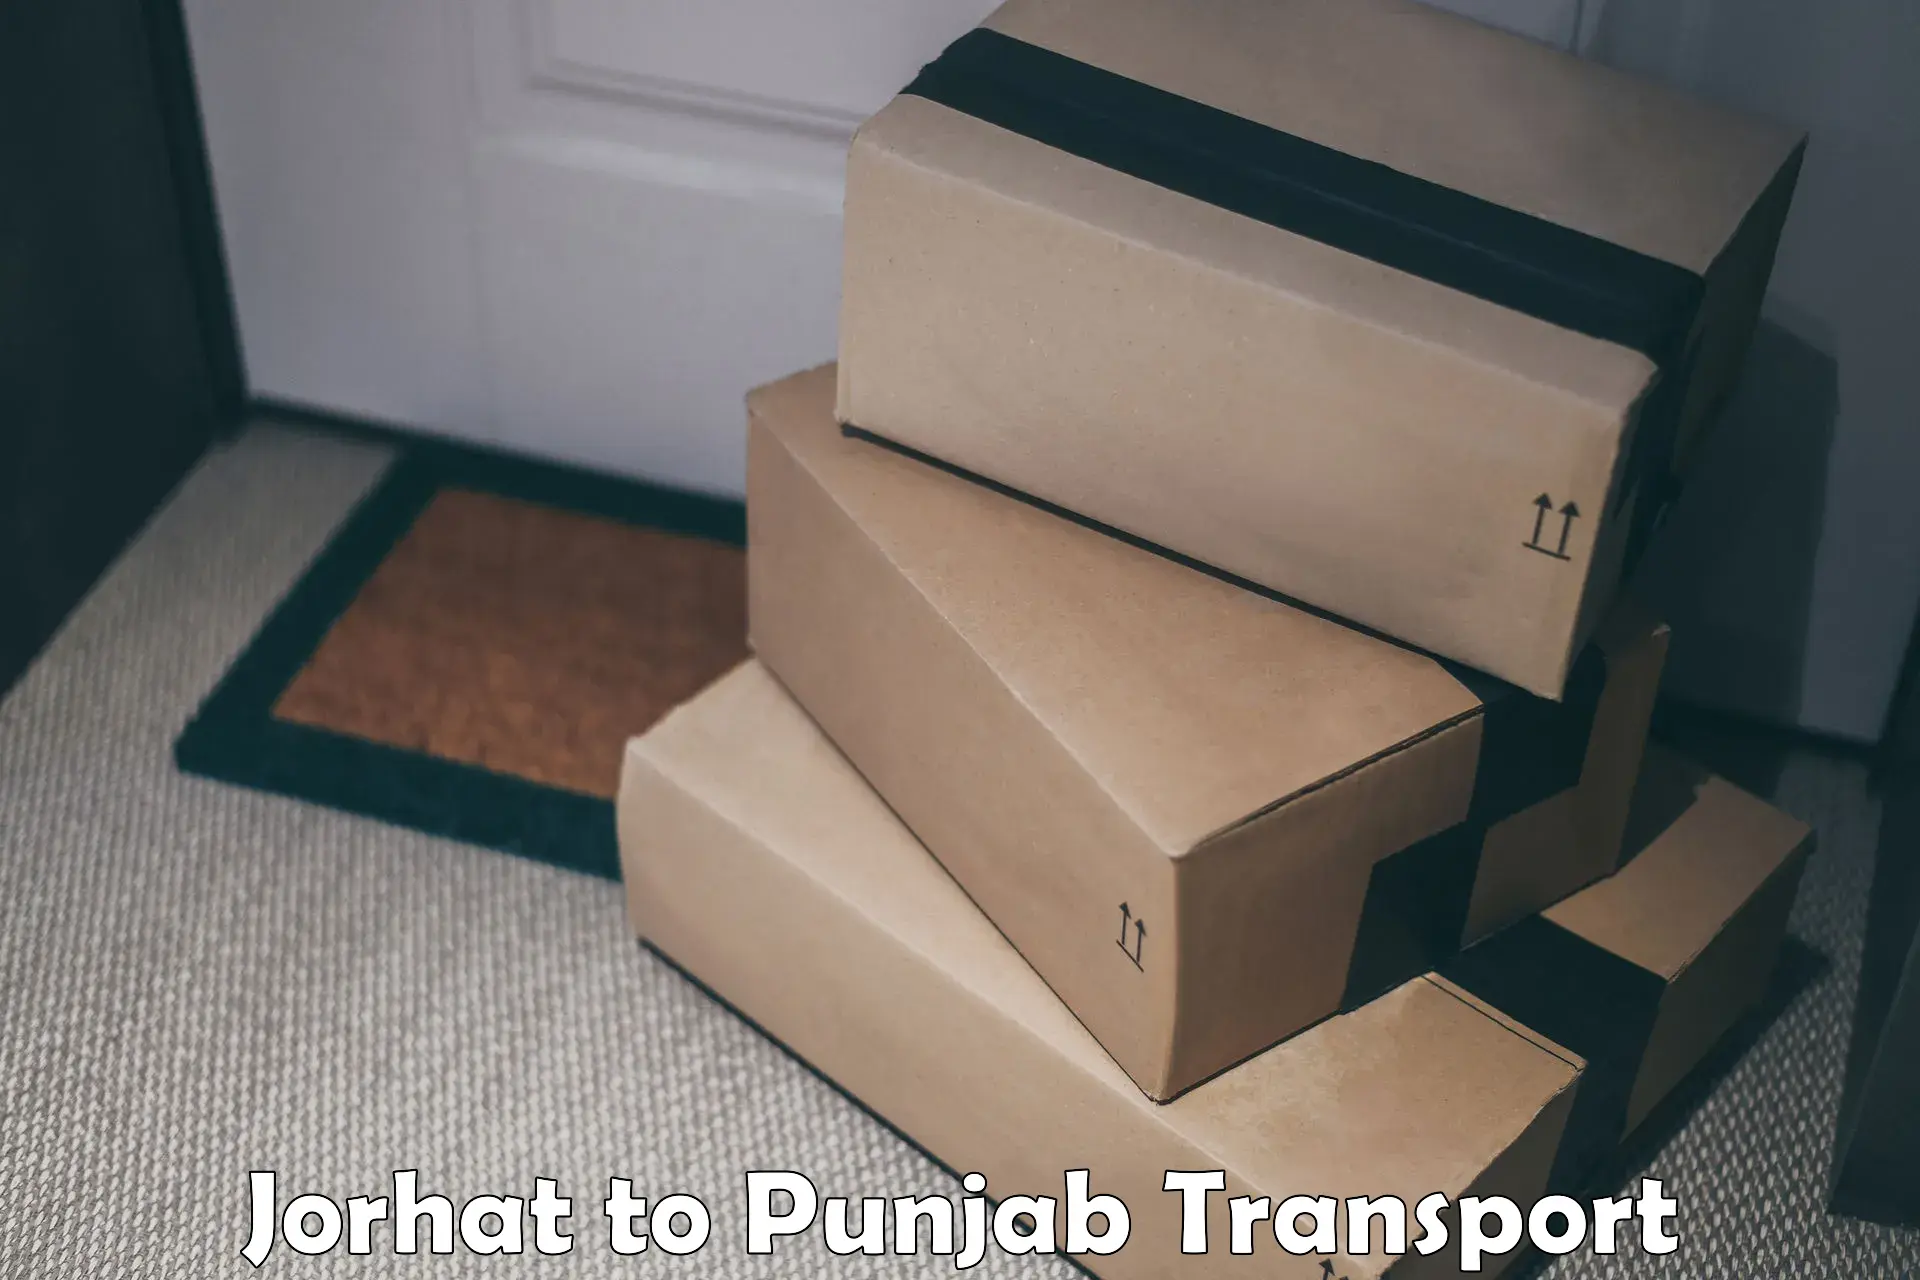 Daily parcel service transport Jorhat to Firozpur